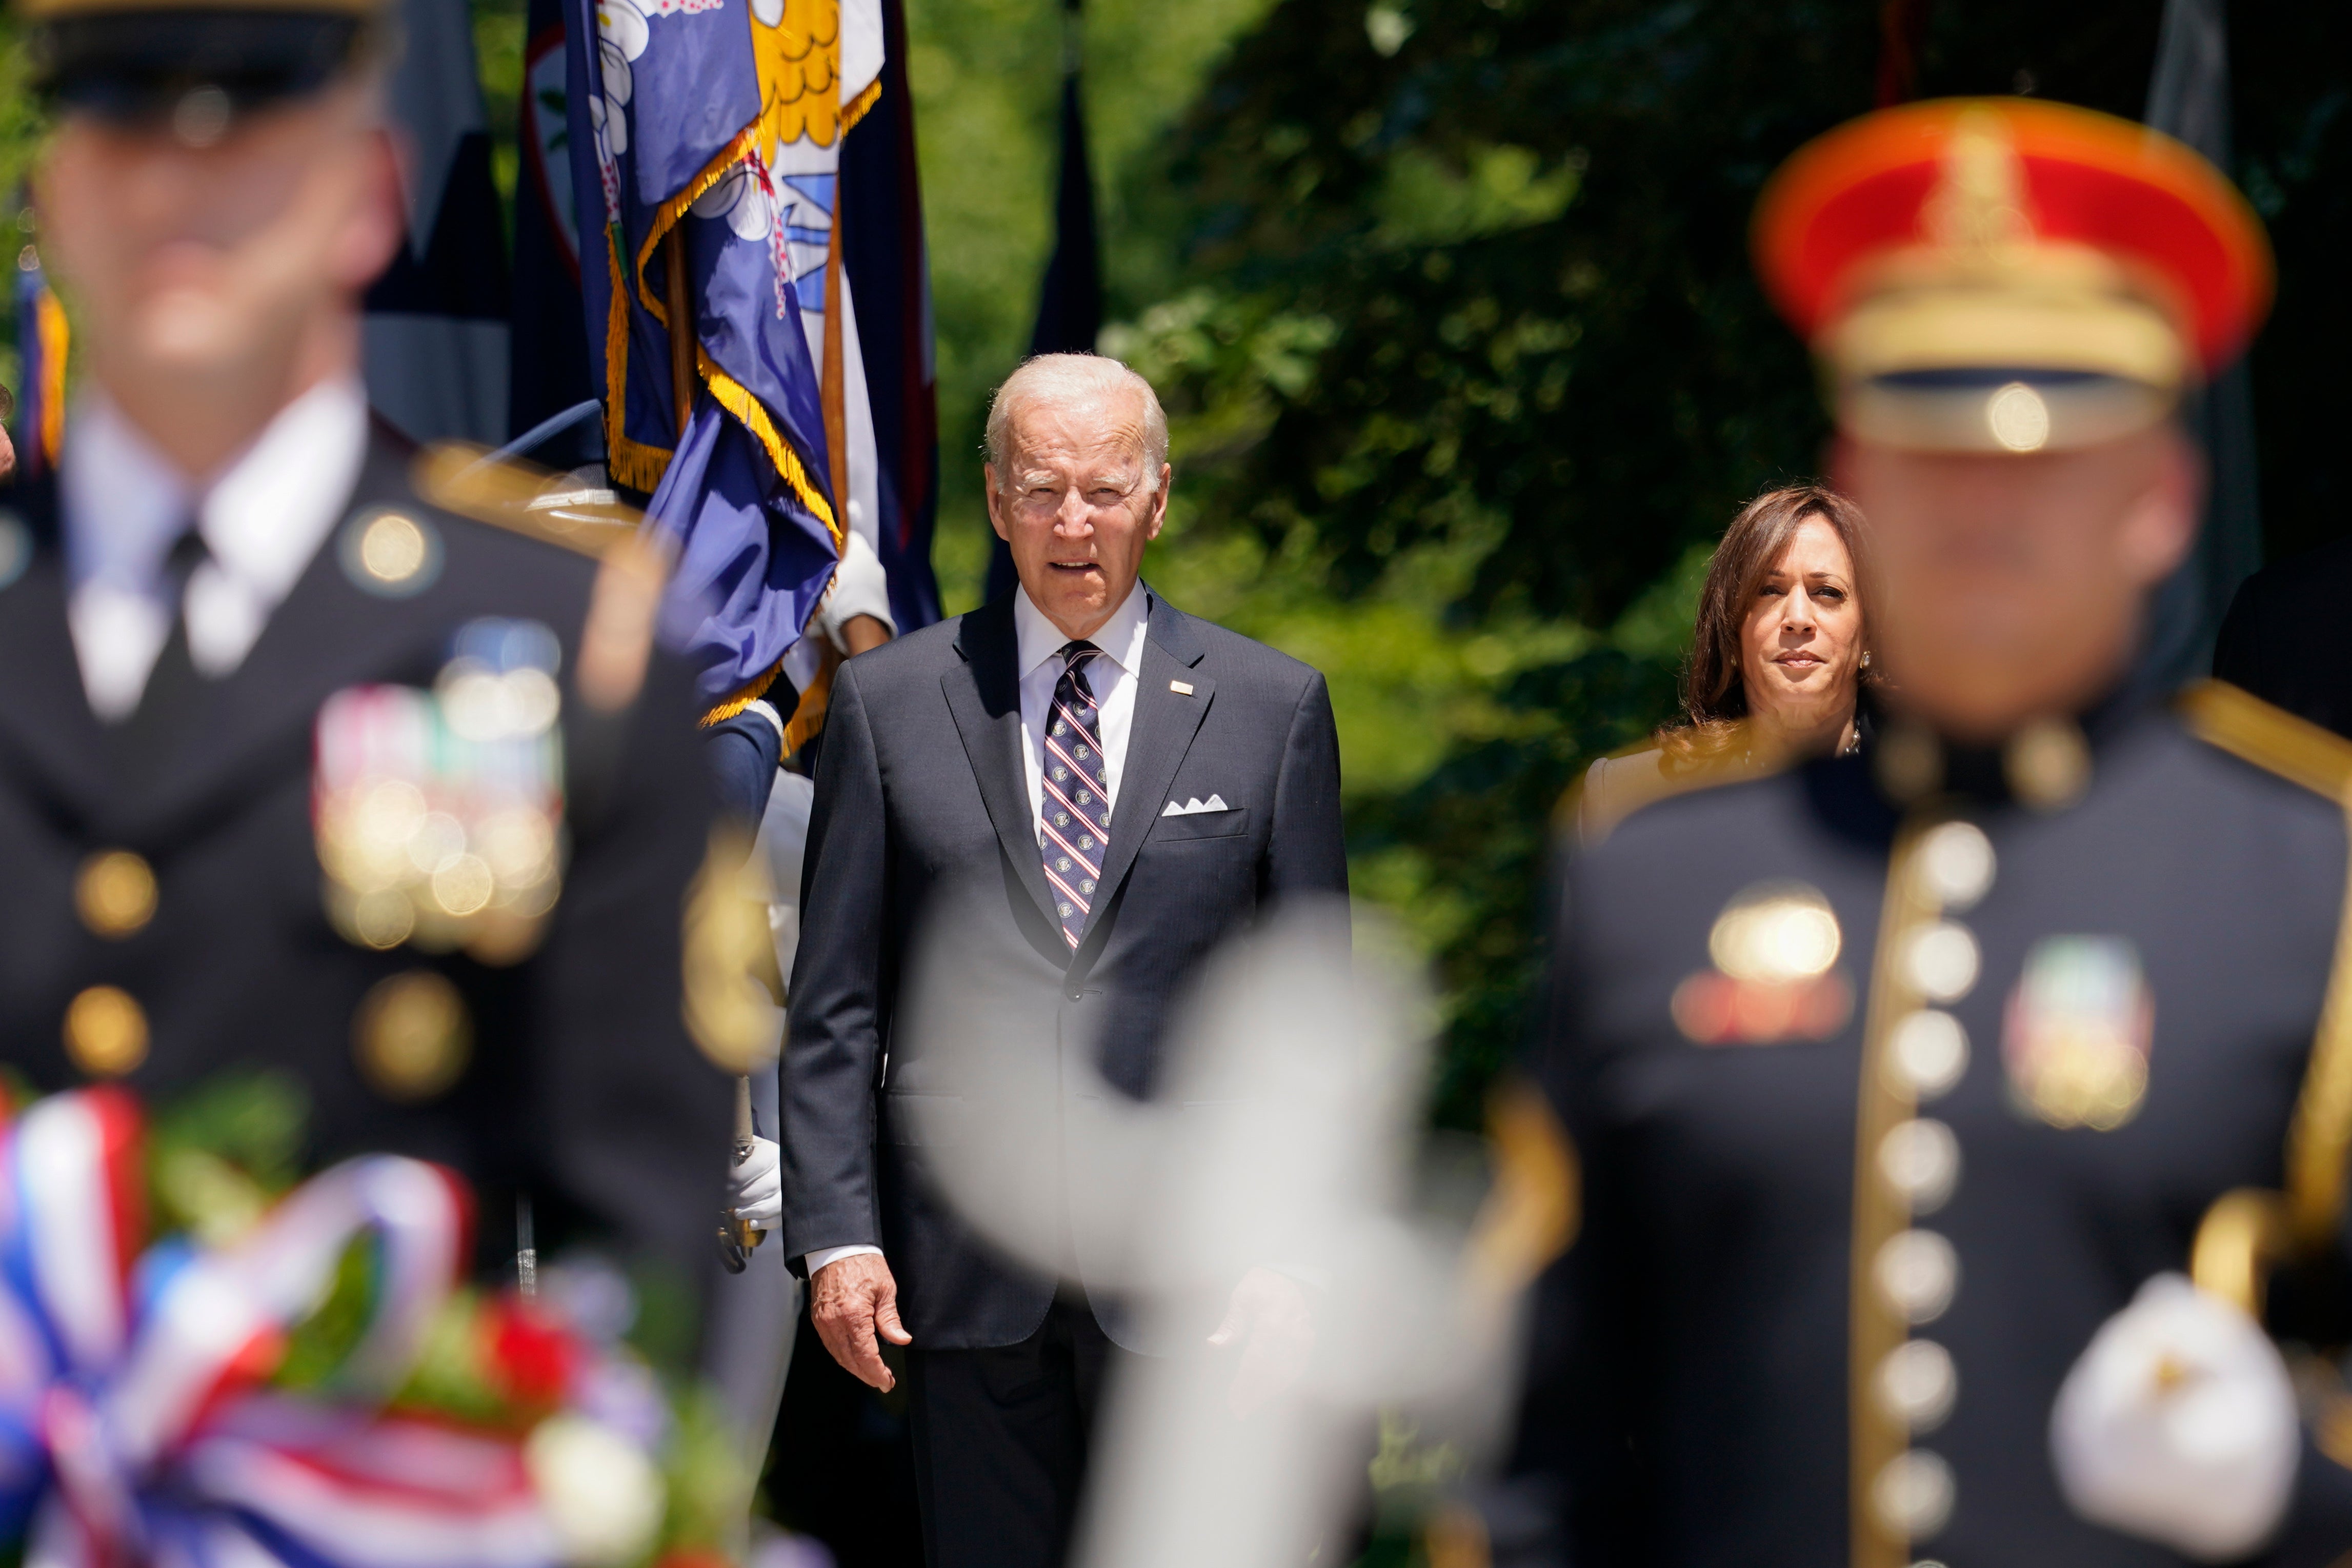 President Joe Biden arrives with Vice President Kamala Harris to lay a wreath at The Tomb of the Unknown Soldier at Arlington National Cemetery on Memorial Day, Monday, May 30, 2022, in Arlington, Va. (AP Photo/Andrew Harnik)